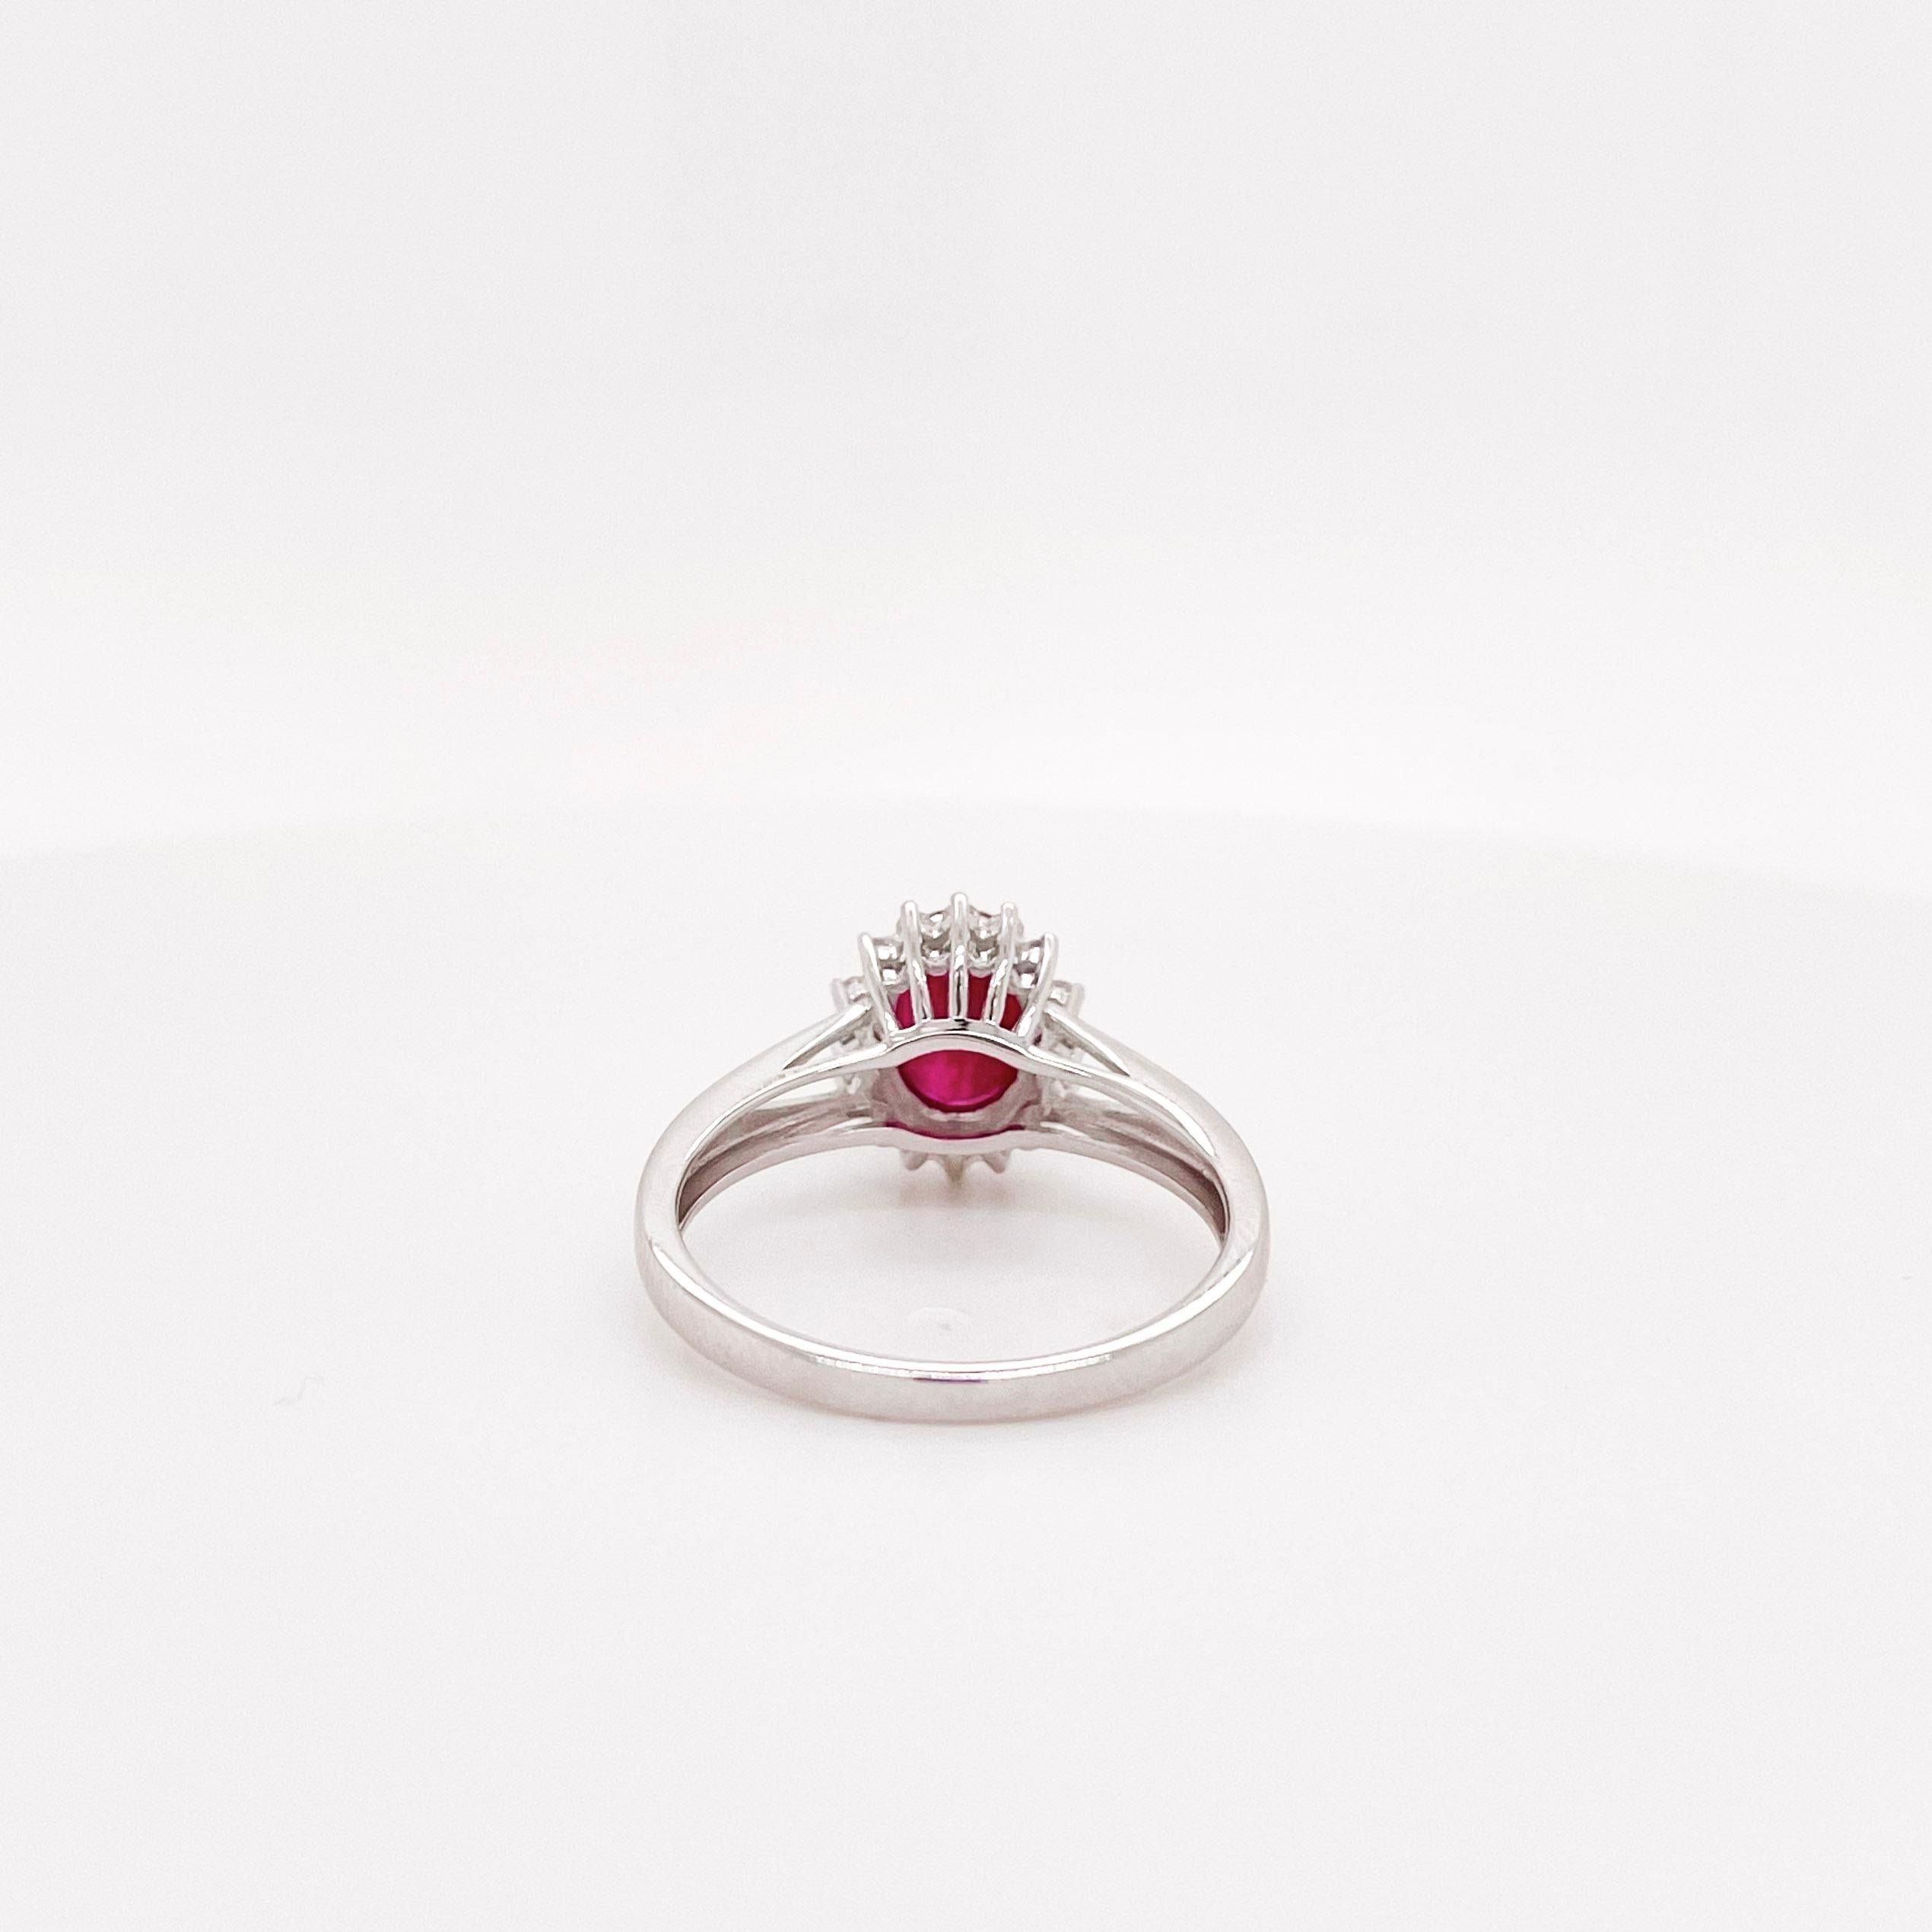 For Sale:  Ruby Diamond Ring, White Gold, Oval Ruby and Diamond Halo, Split Shank 3